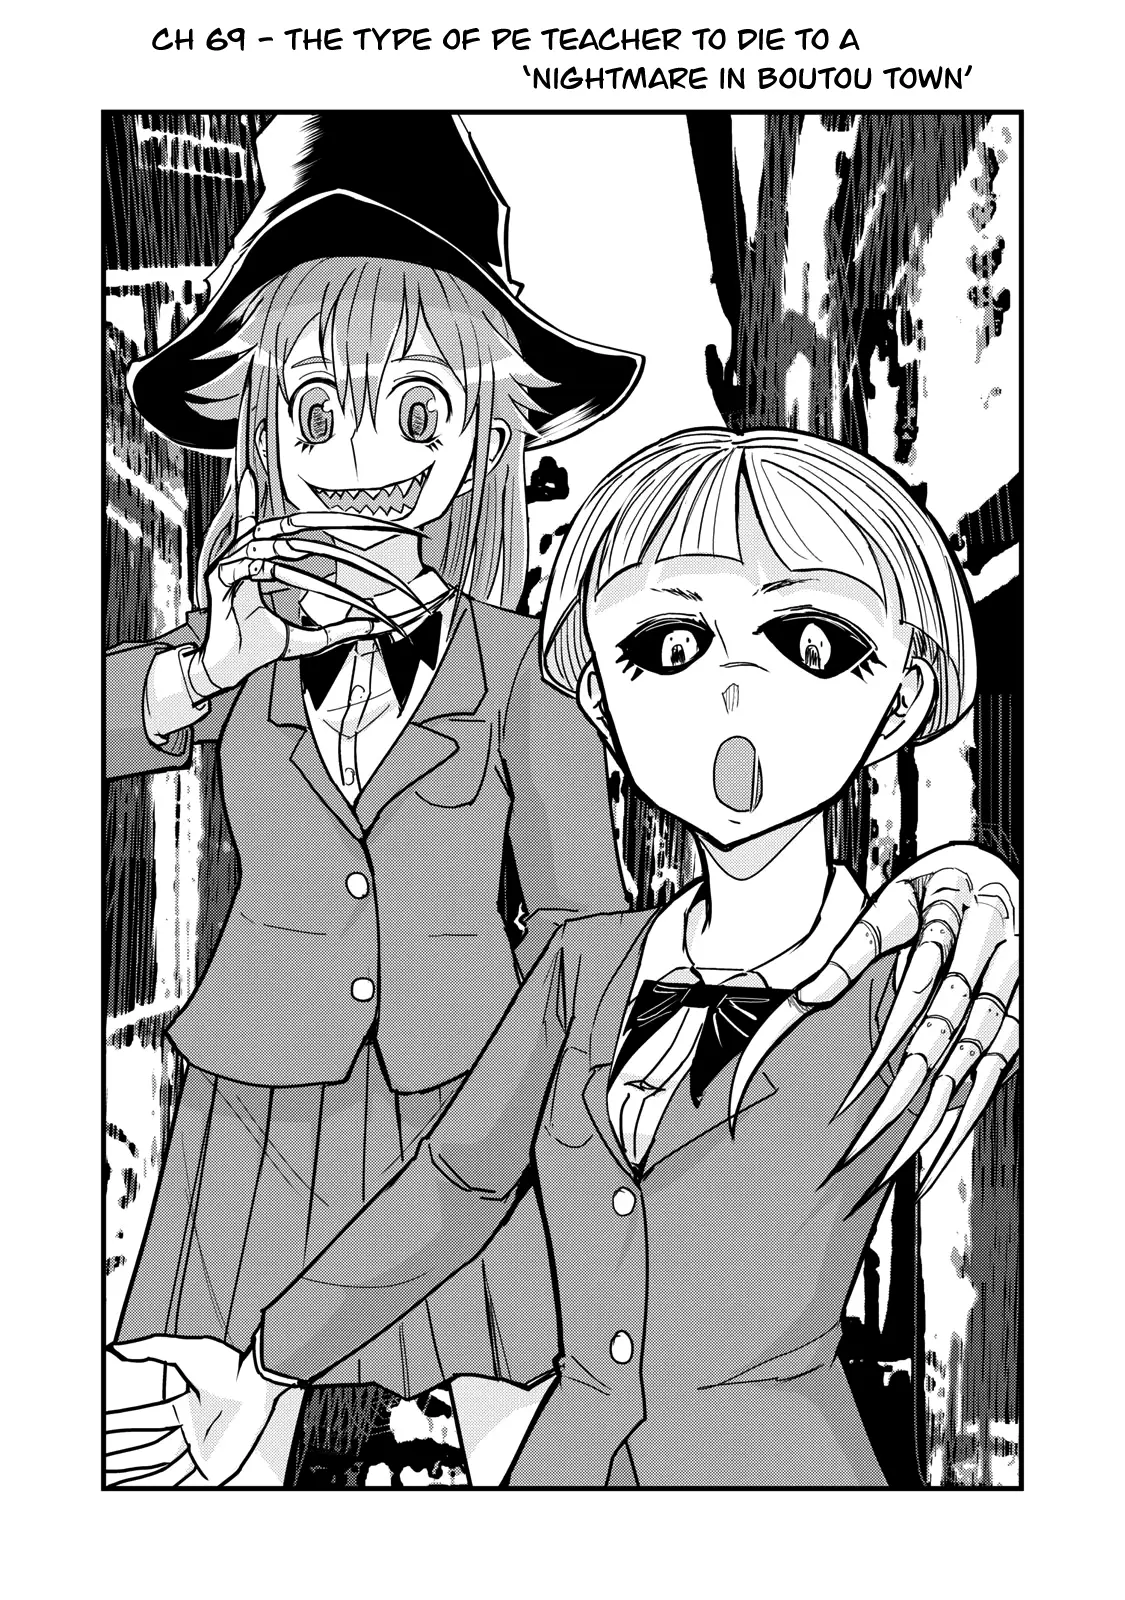 A Manga About The Kind Of Pe Teacher Who Dies At The Start Of A School Horror Movie - 69 page 2-7873e19b